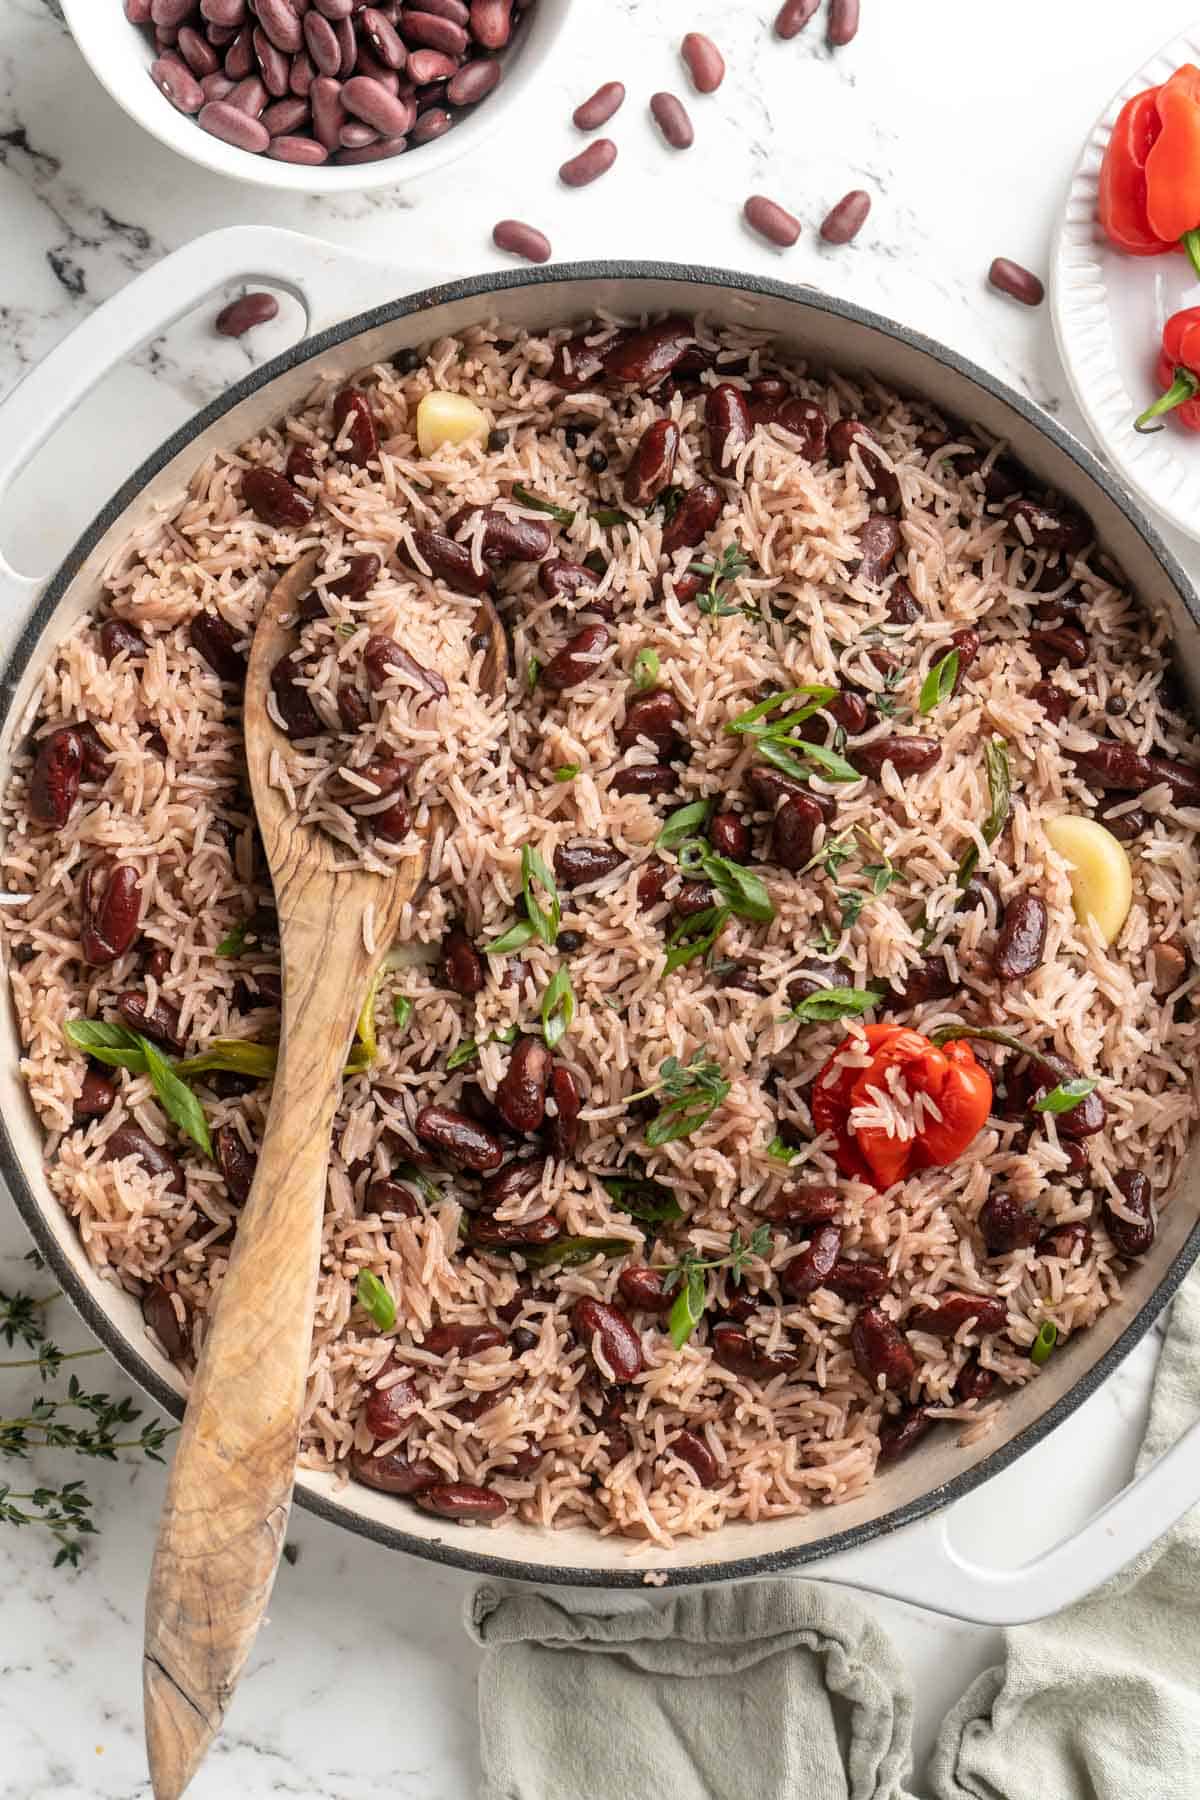 Overhead view of Jamaican rice and peas in pan